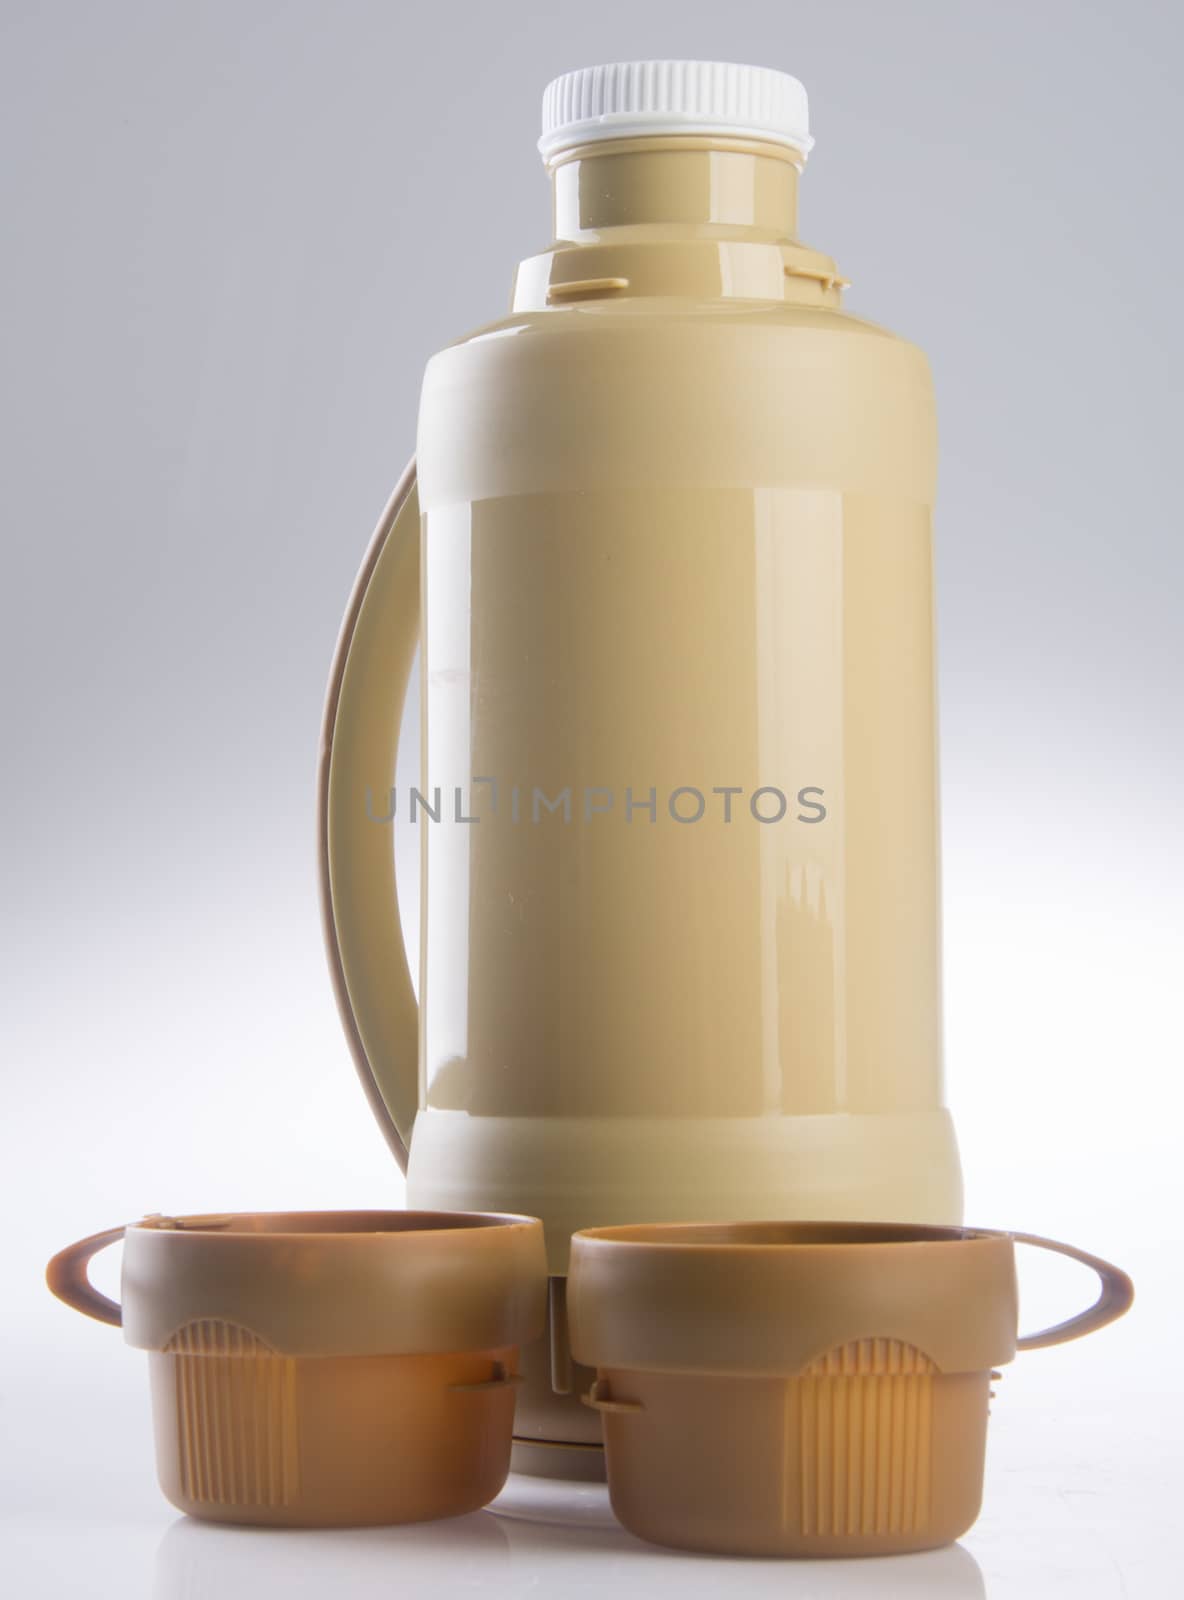 Thermo flask. Thermo flask on the background